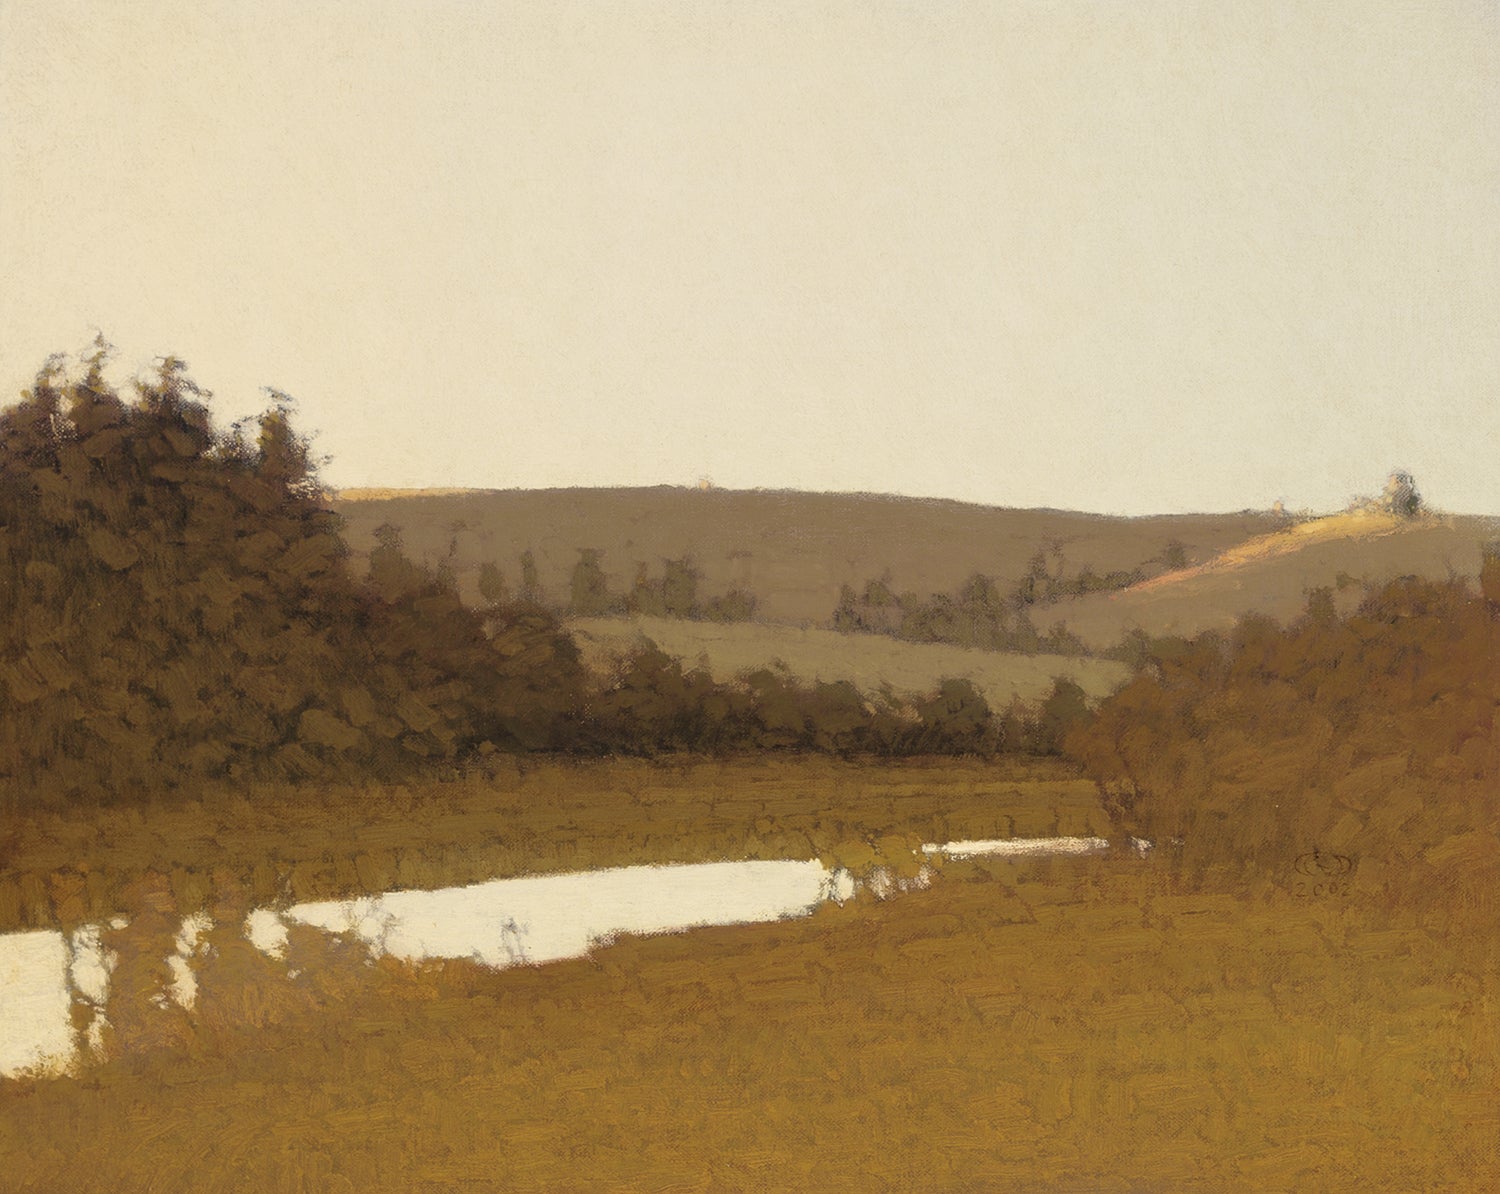 painting with creek in foreground and rolling hills in distance